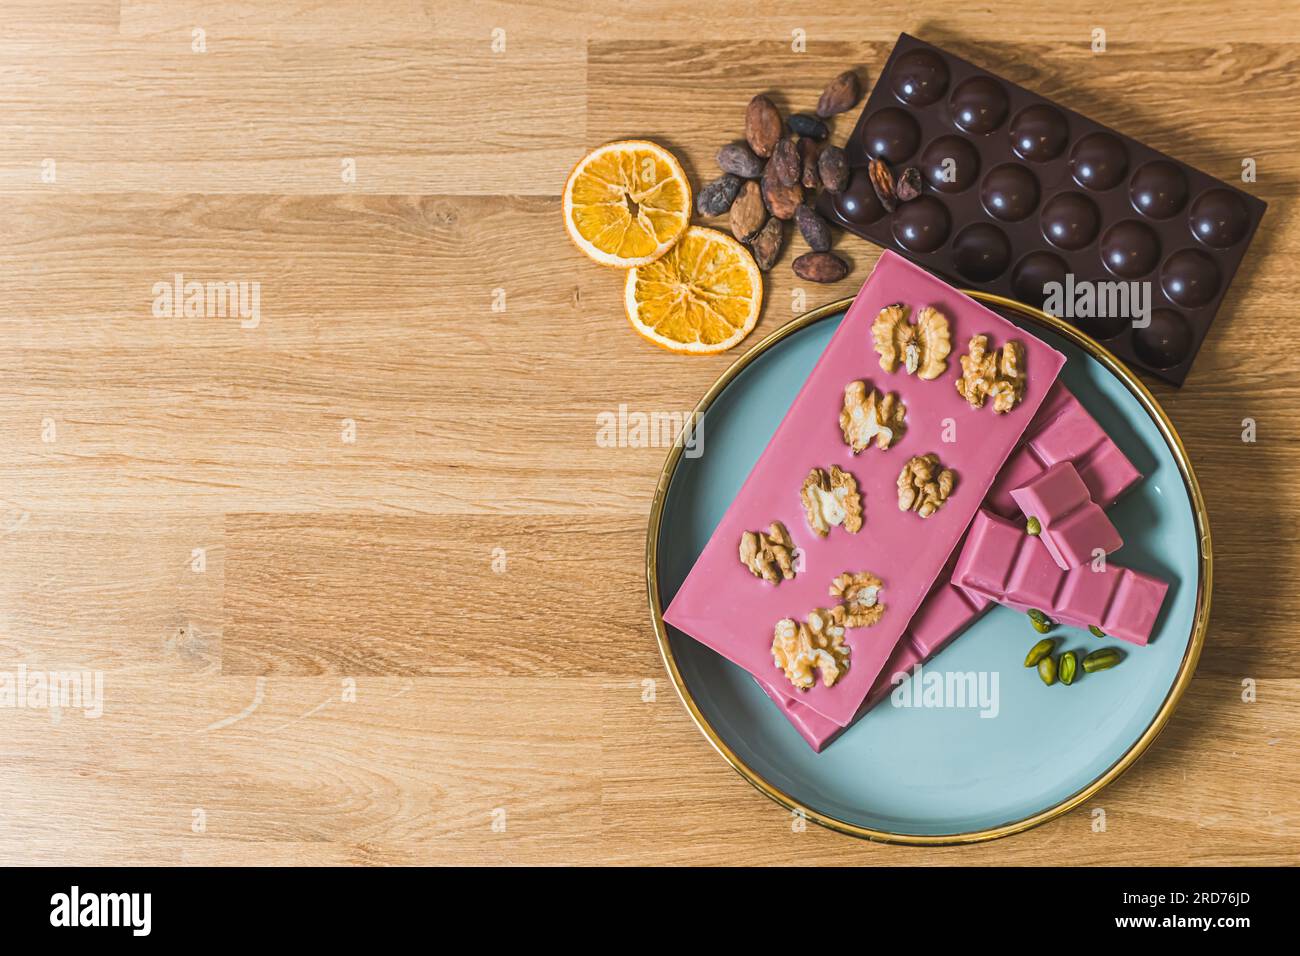 Serving suggestion concept. Brs of ruby aand dark chocolate arrenged on blue plate and wooden table decorated with walnuts slices of orange and cocoa seeds. Copy space. High quality photo Stock Photo